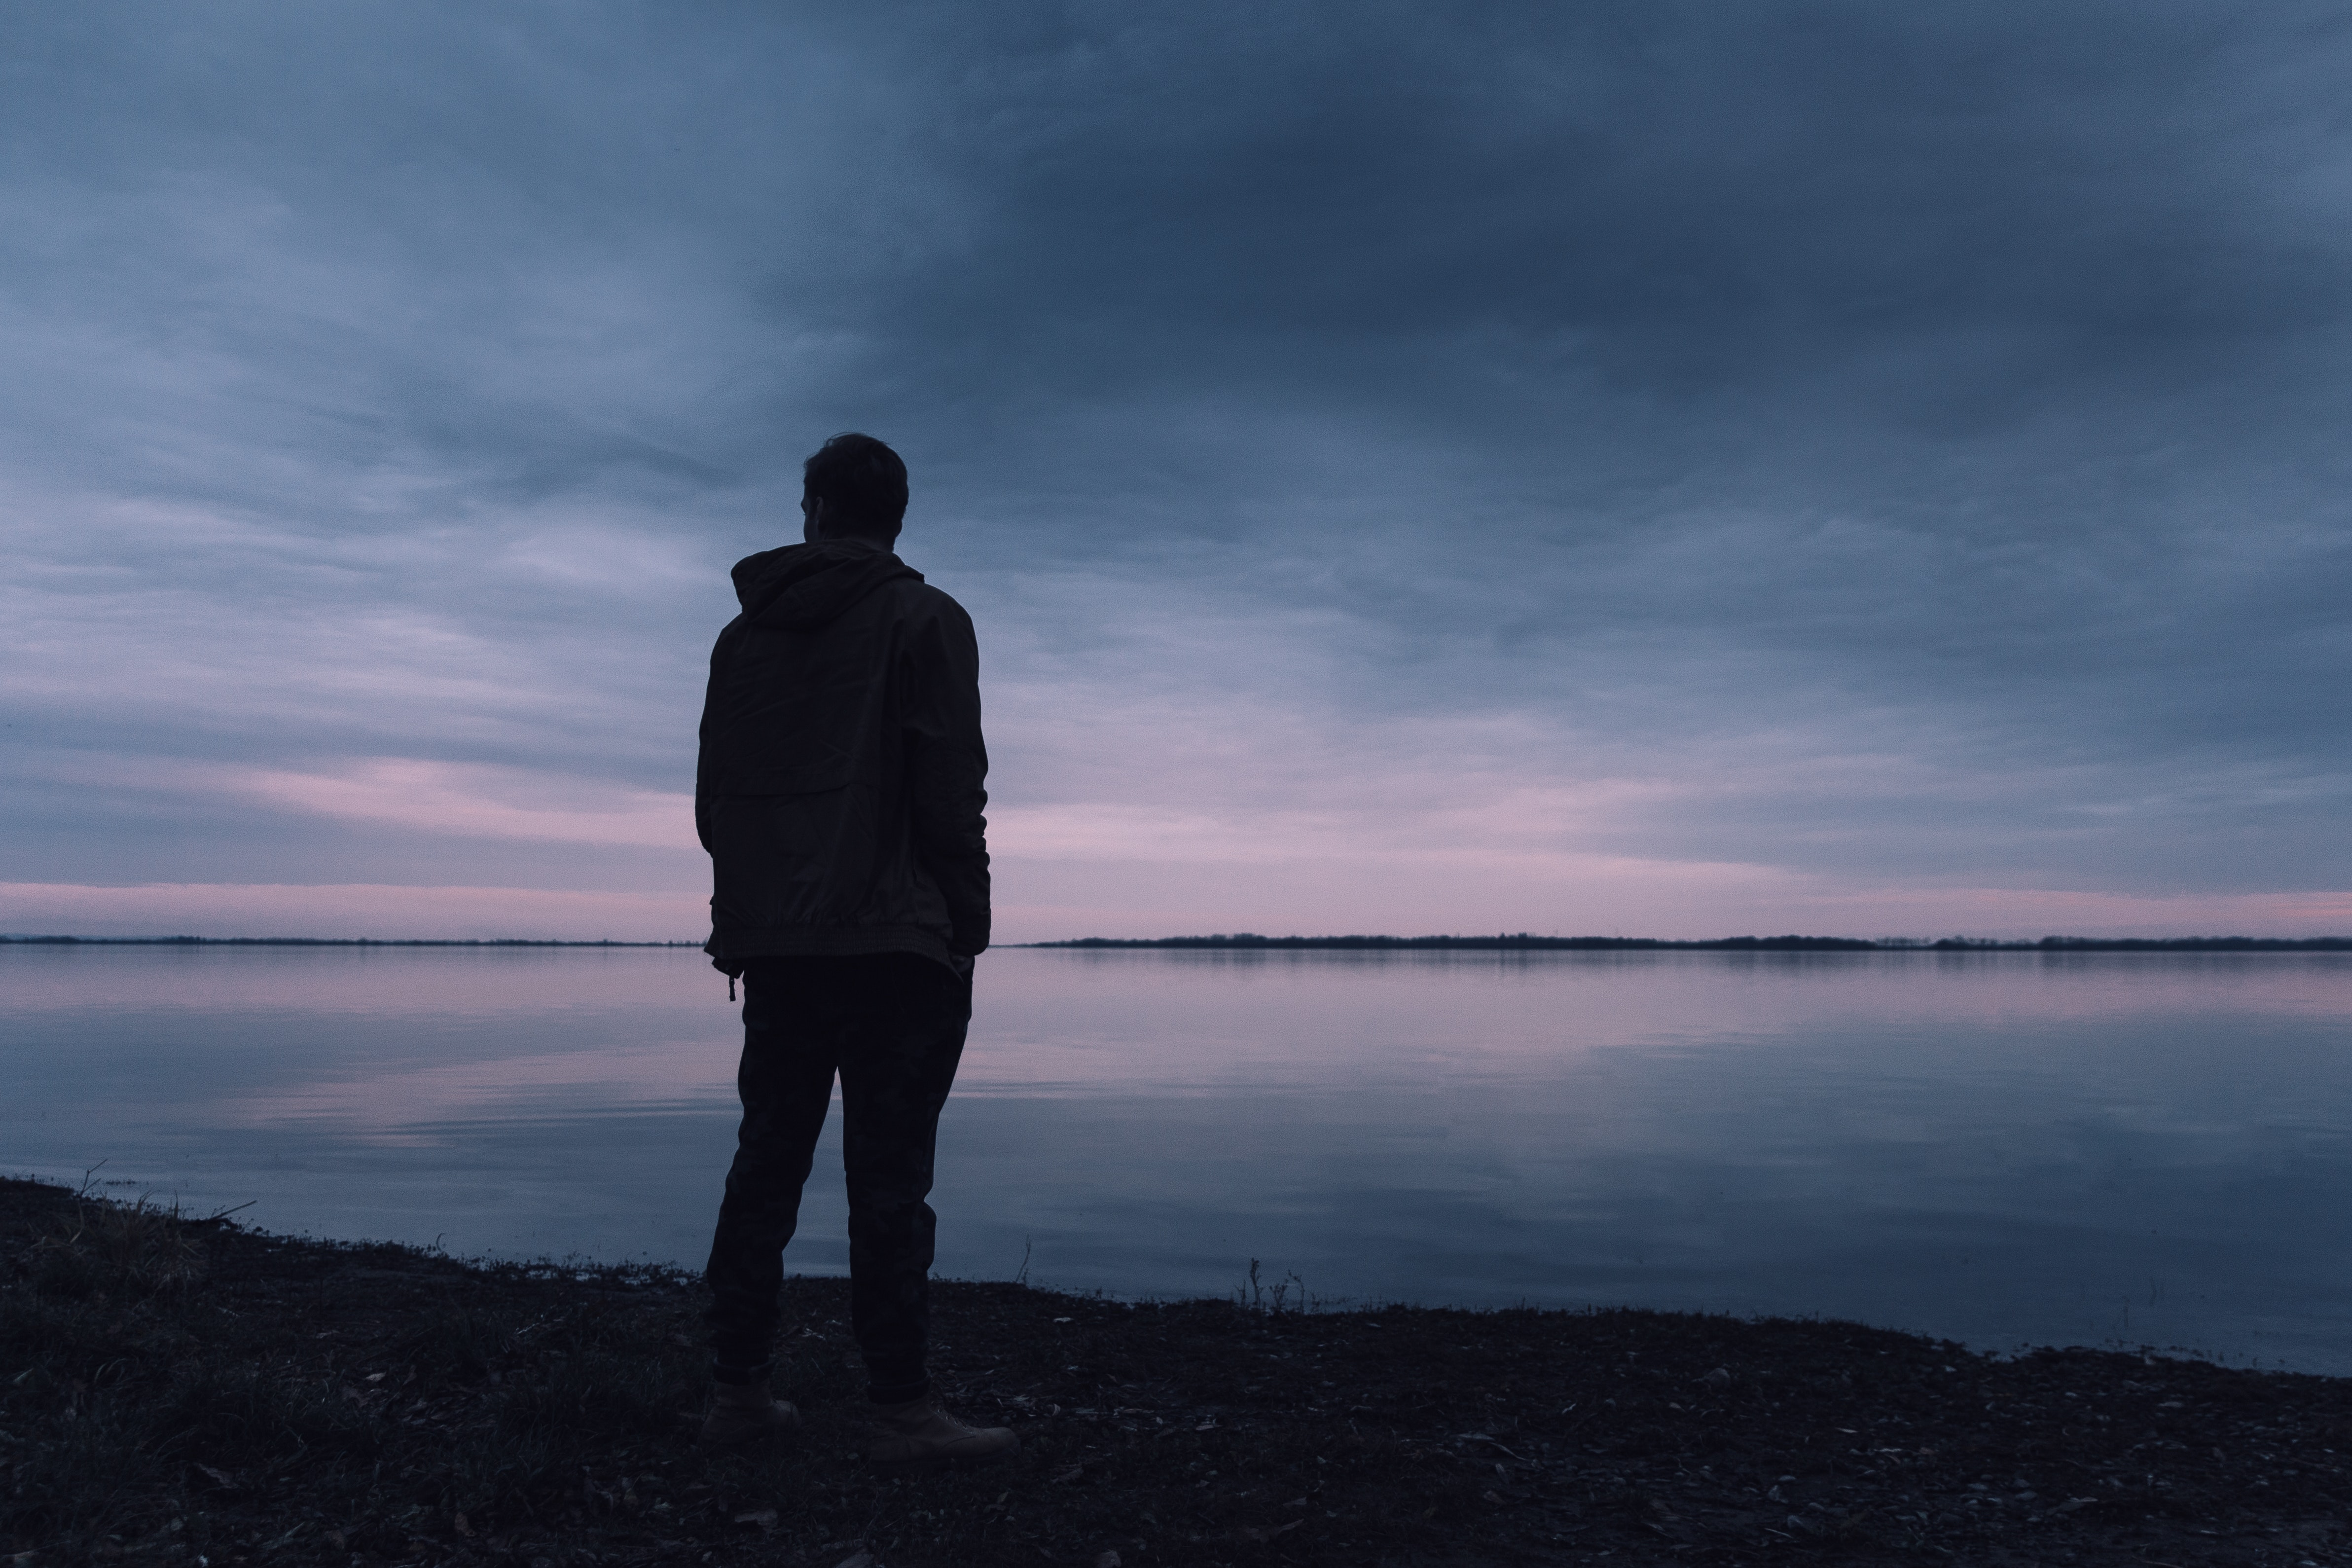 The dark silhouette of a man stands at the edge of a large glassy lake as the sun begins to rise in the distance and illuminate a cloudy sky.